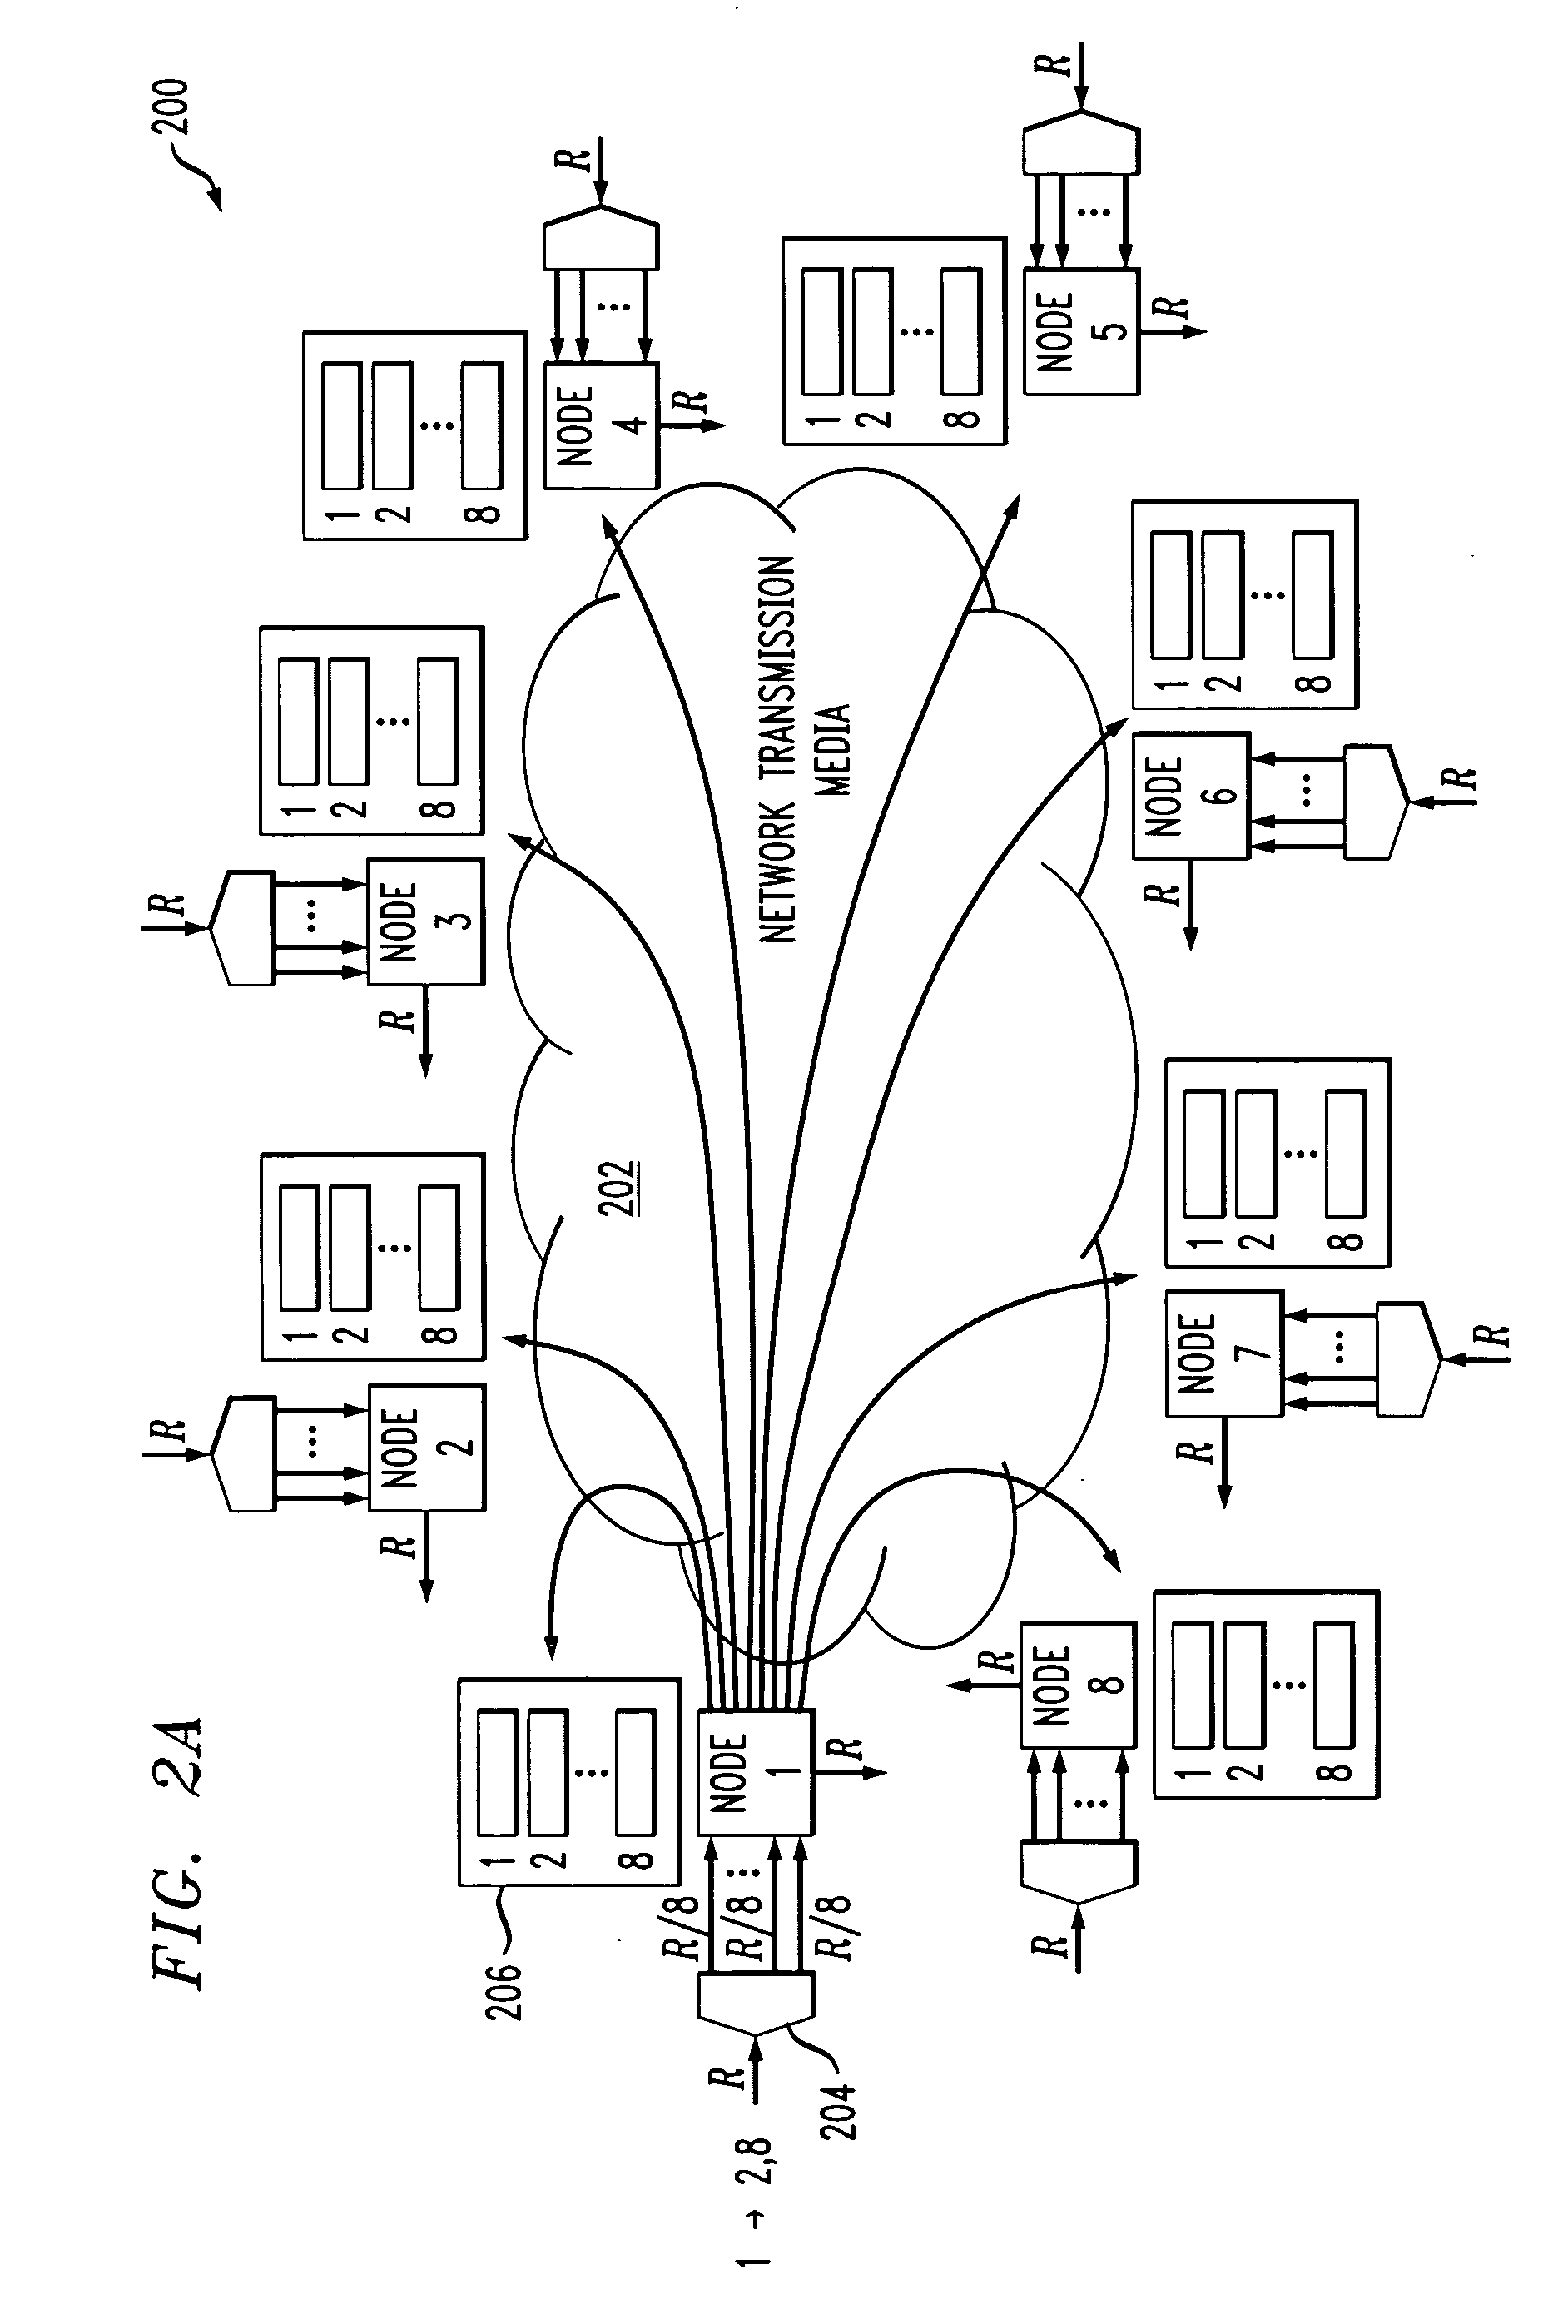 Packet reorder resolution in a load-balanced network architecture